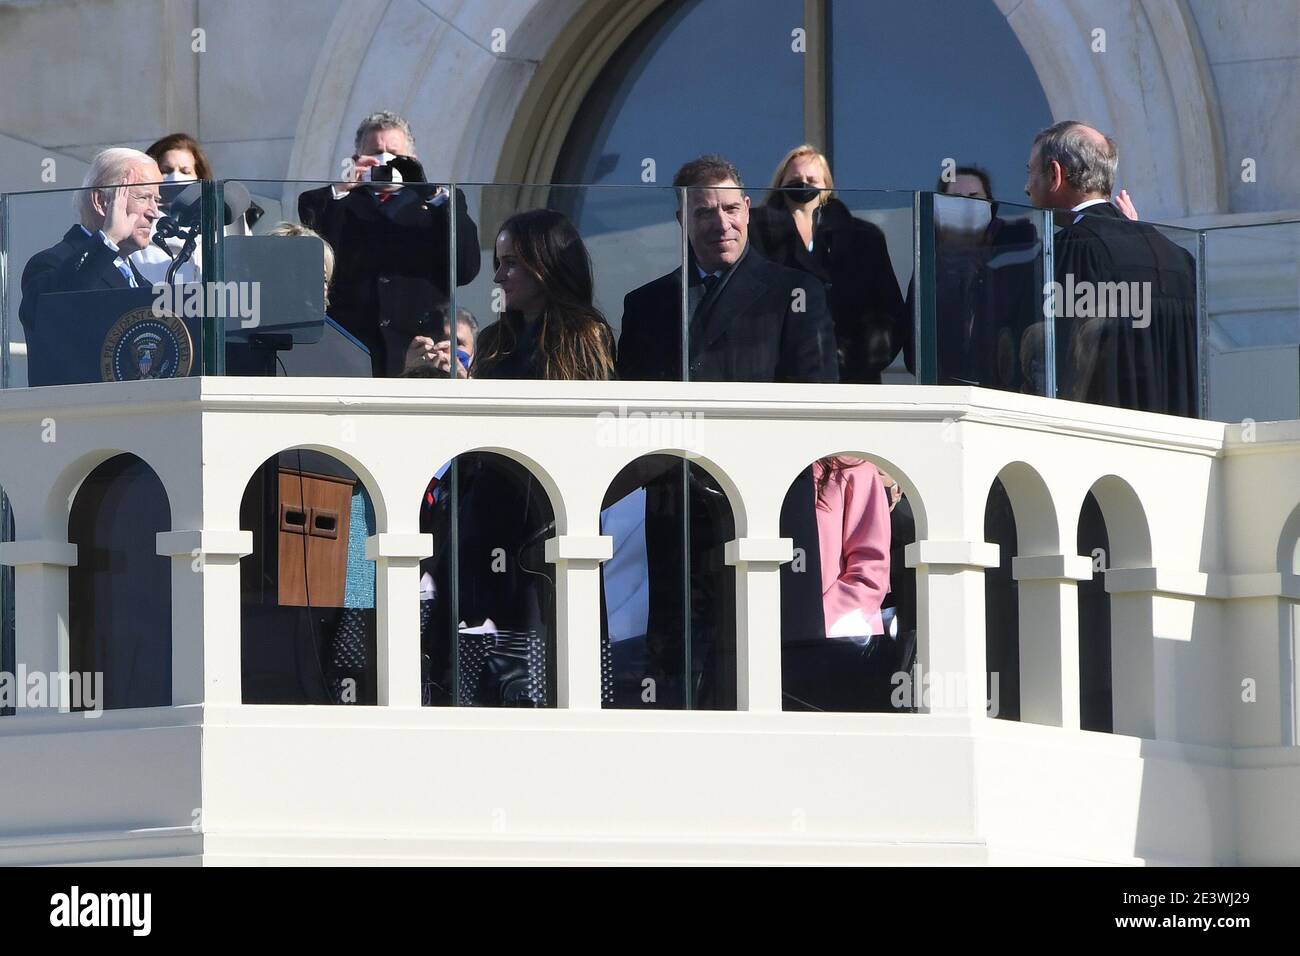 Washington, DC, USA. 20th Jan, 2021. 1/20/20- U.S. Capitol- Washington DC.The U.S.Capitol hosts the Inauguration of the 46th President of The United States Joseph R. Biden .Biden is sworn in by Chief Justice Roberts. Credit: Christy Bowe/ZUMA Wire/Alamy Live News Stock Photo